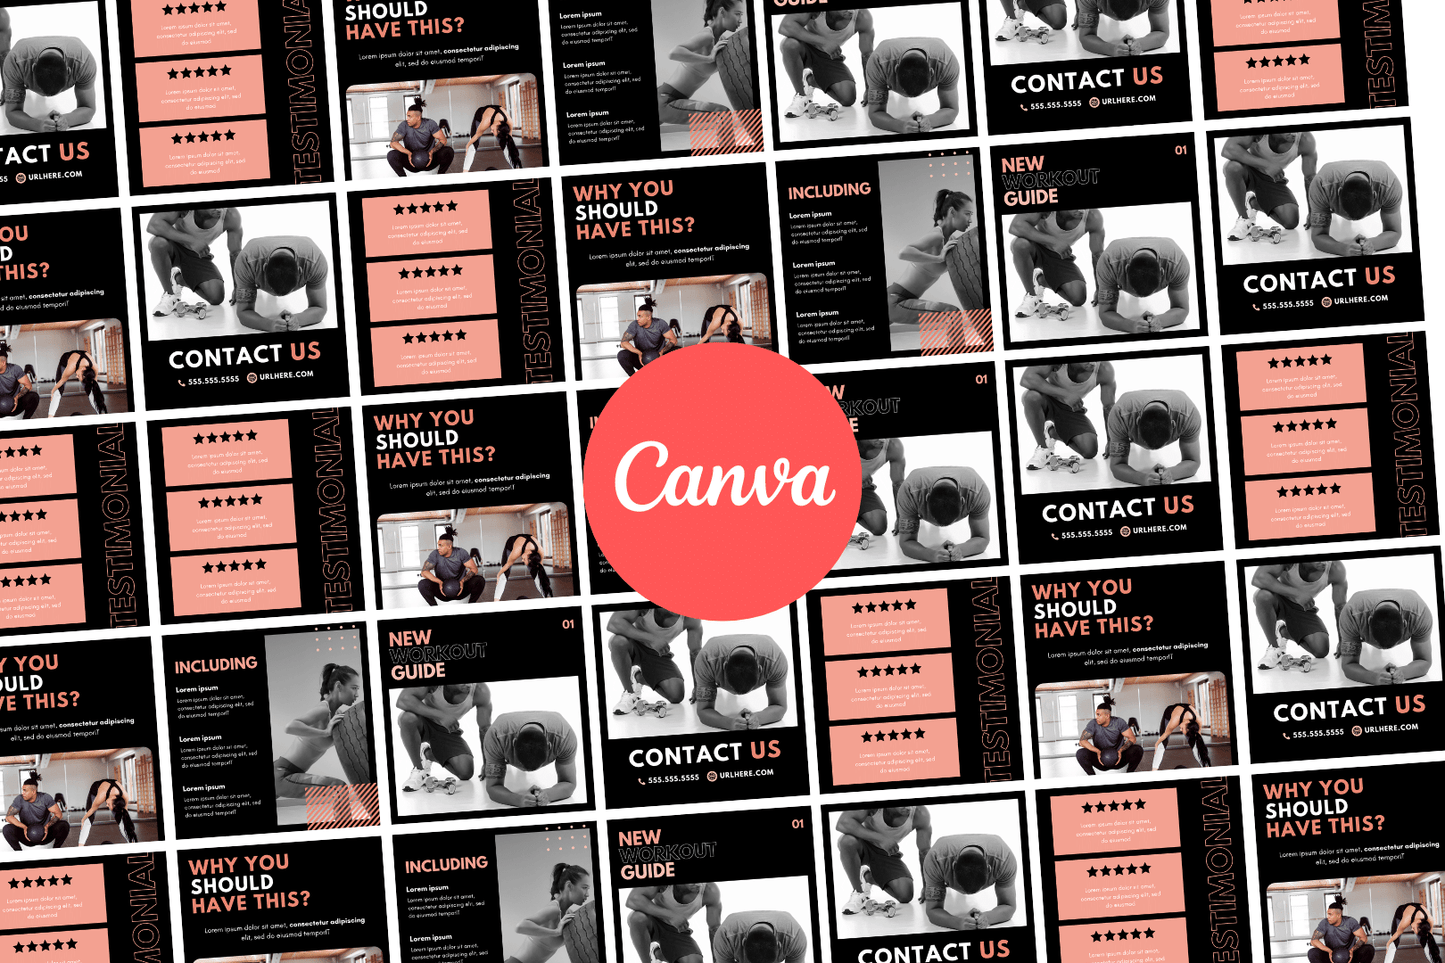 50 GYM + Fitness ADS Templates